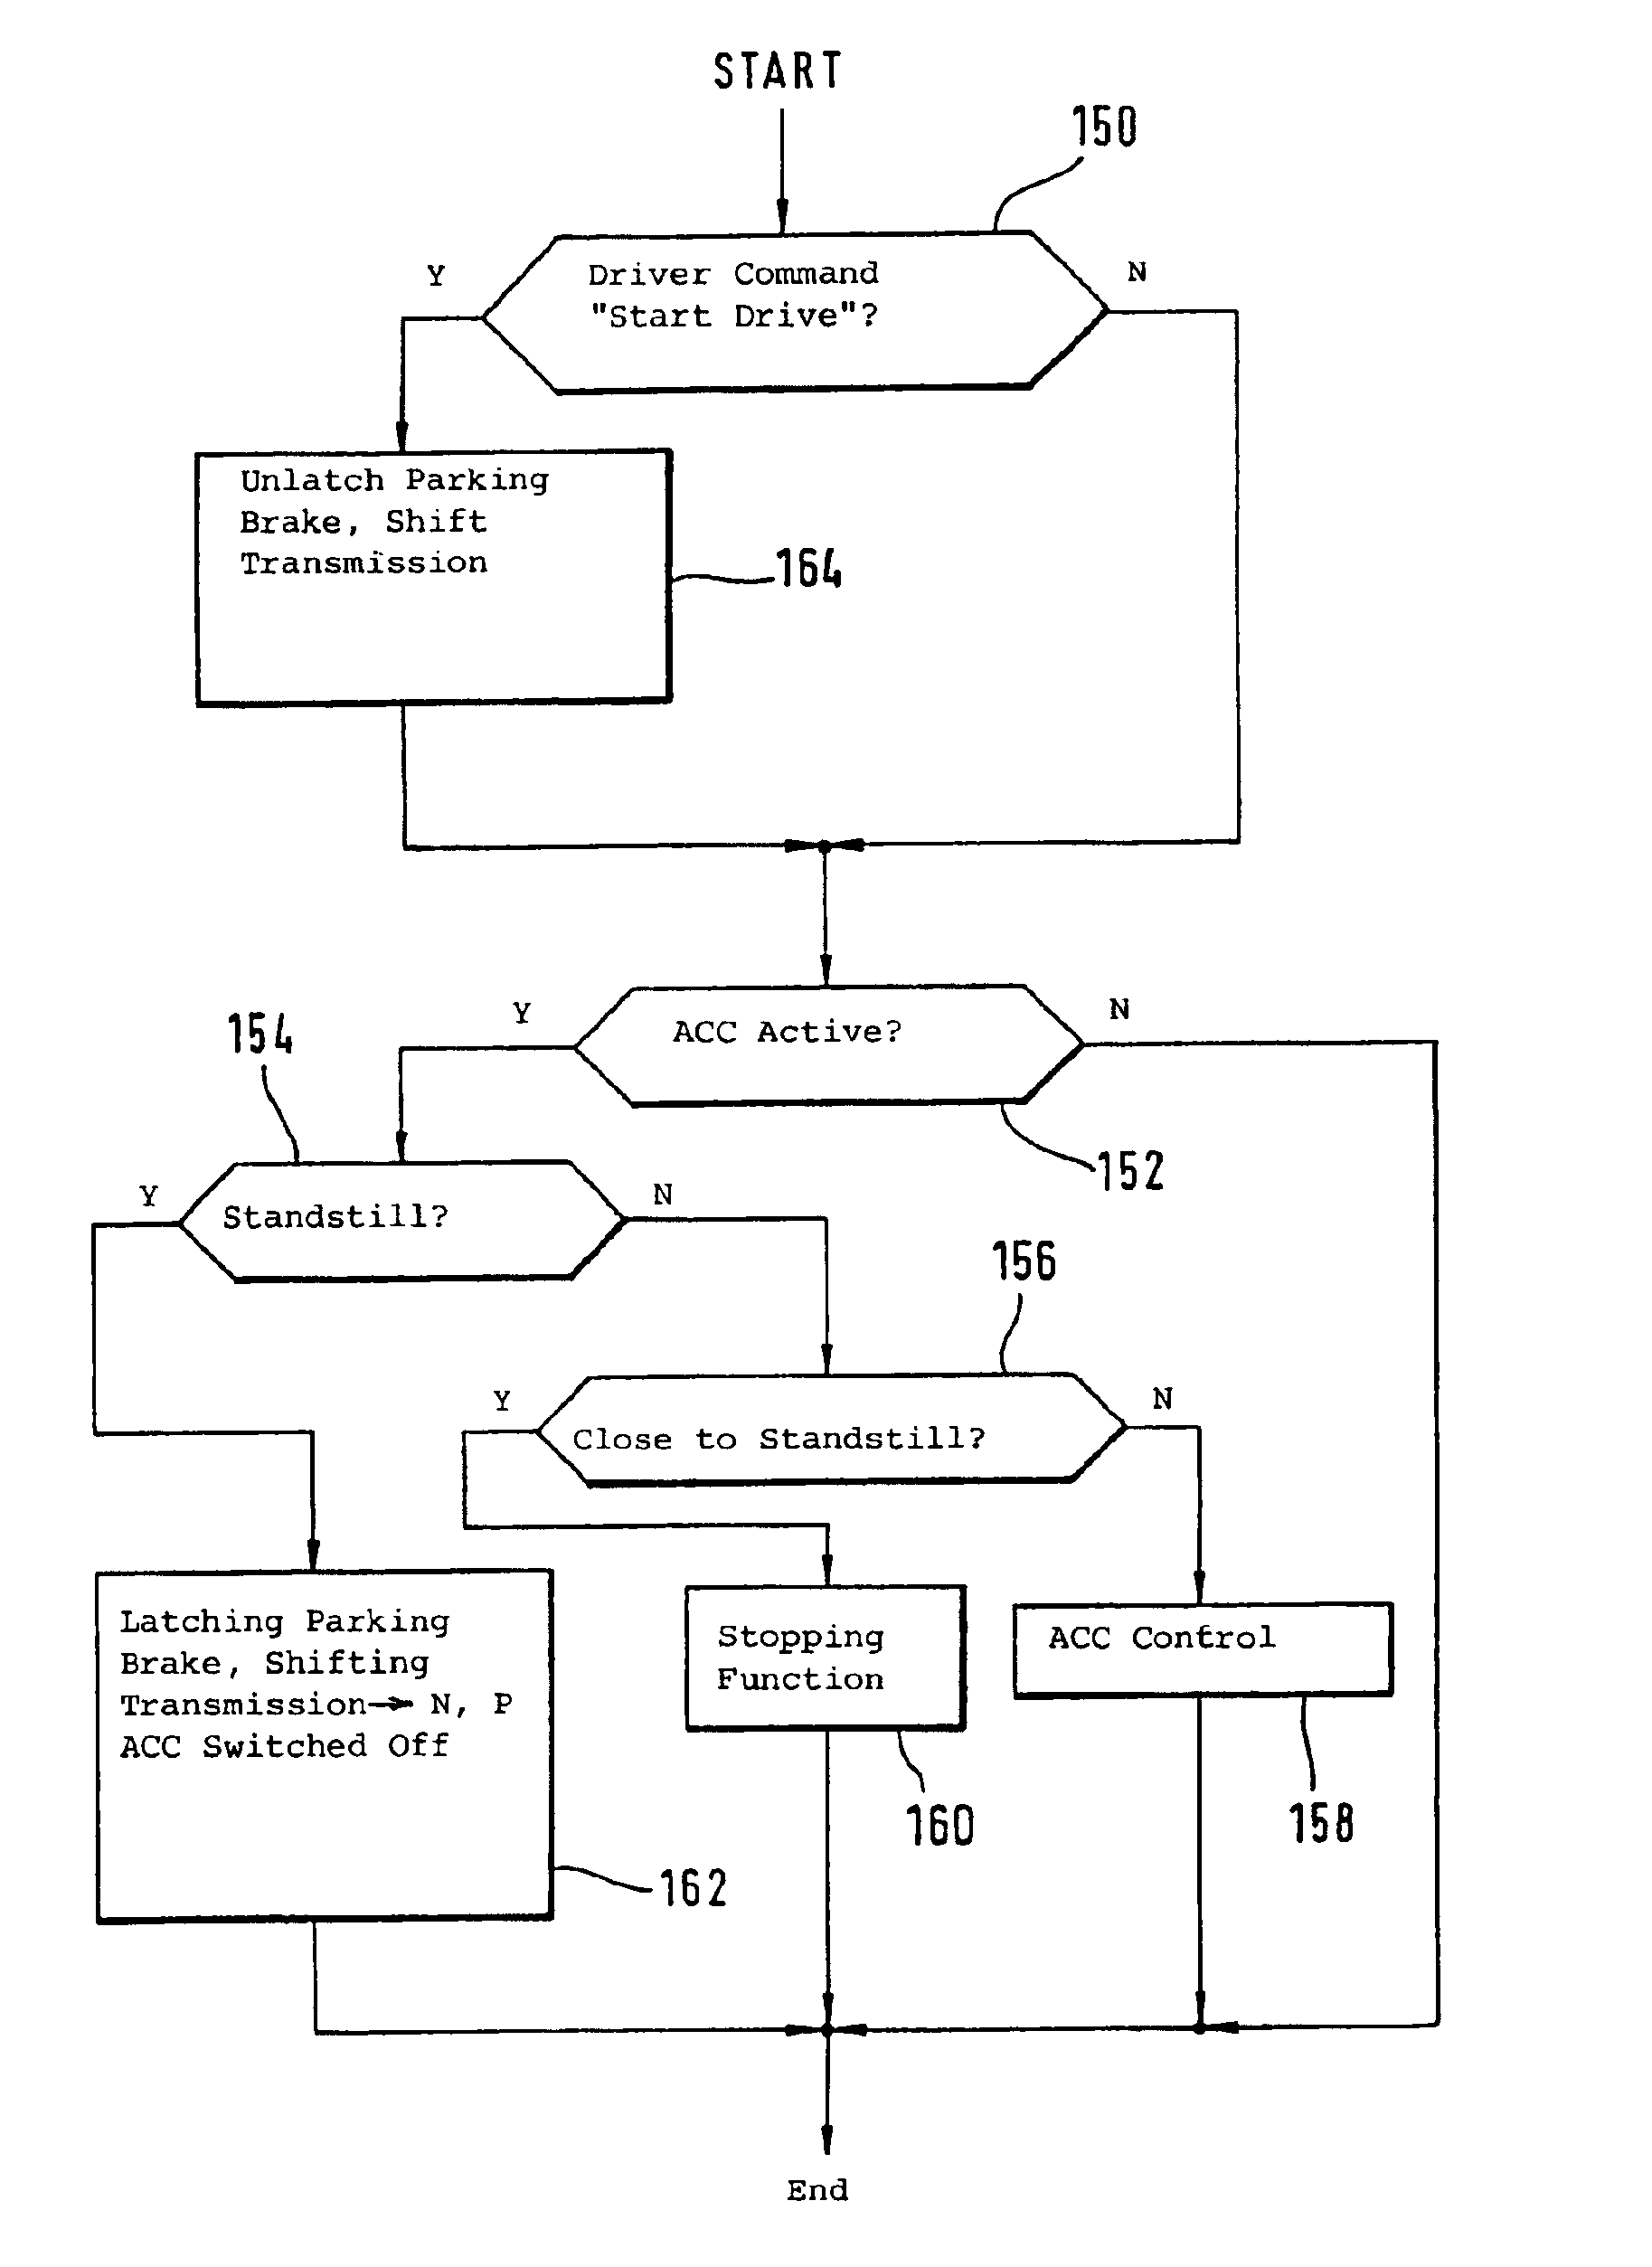 Method and device for securing the standstill of a vehicle, notably in conjunction with a vehicle speed control